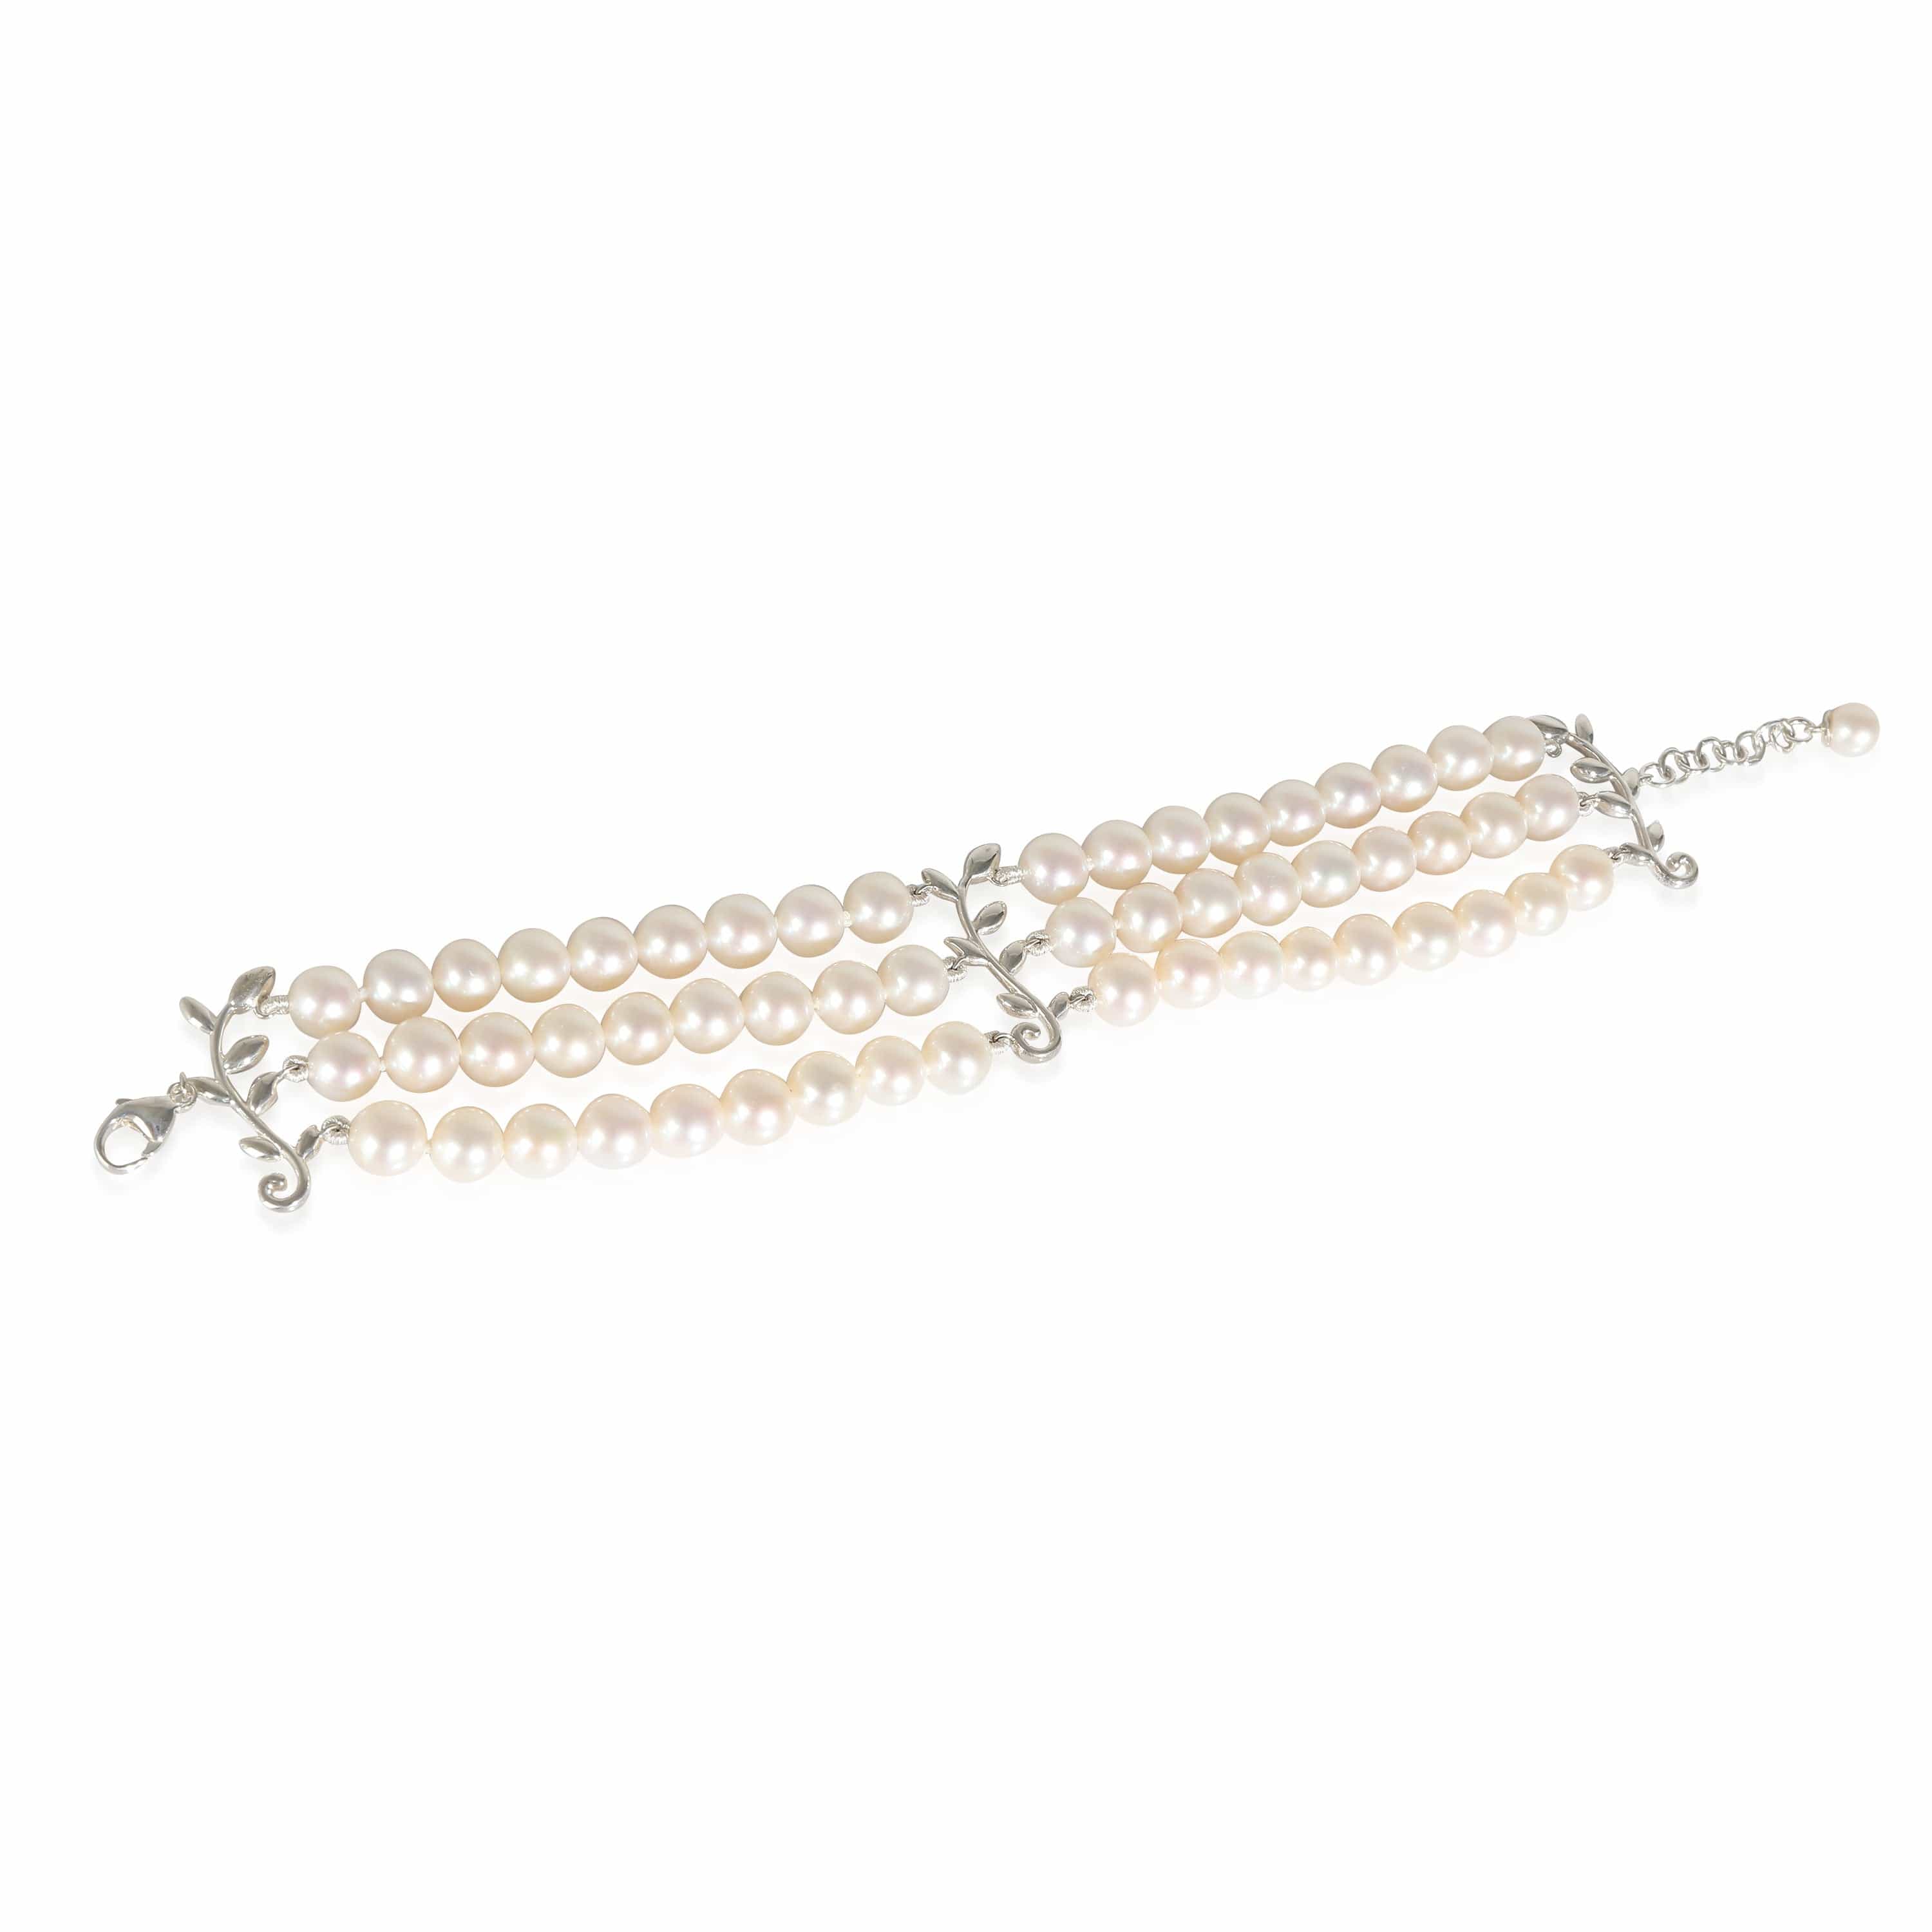 Tiffany & Co. Tiffany & Co. Paloma Picasso Pearl Bracelet in  Sterling Silver